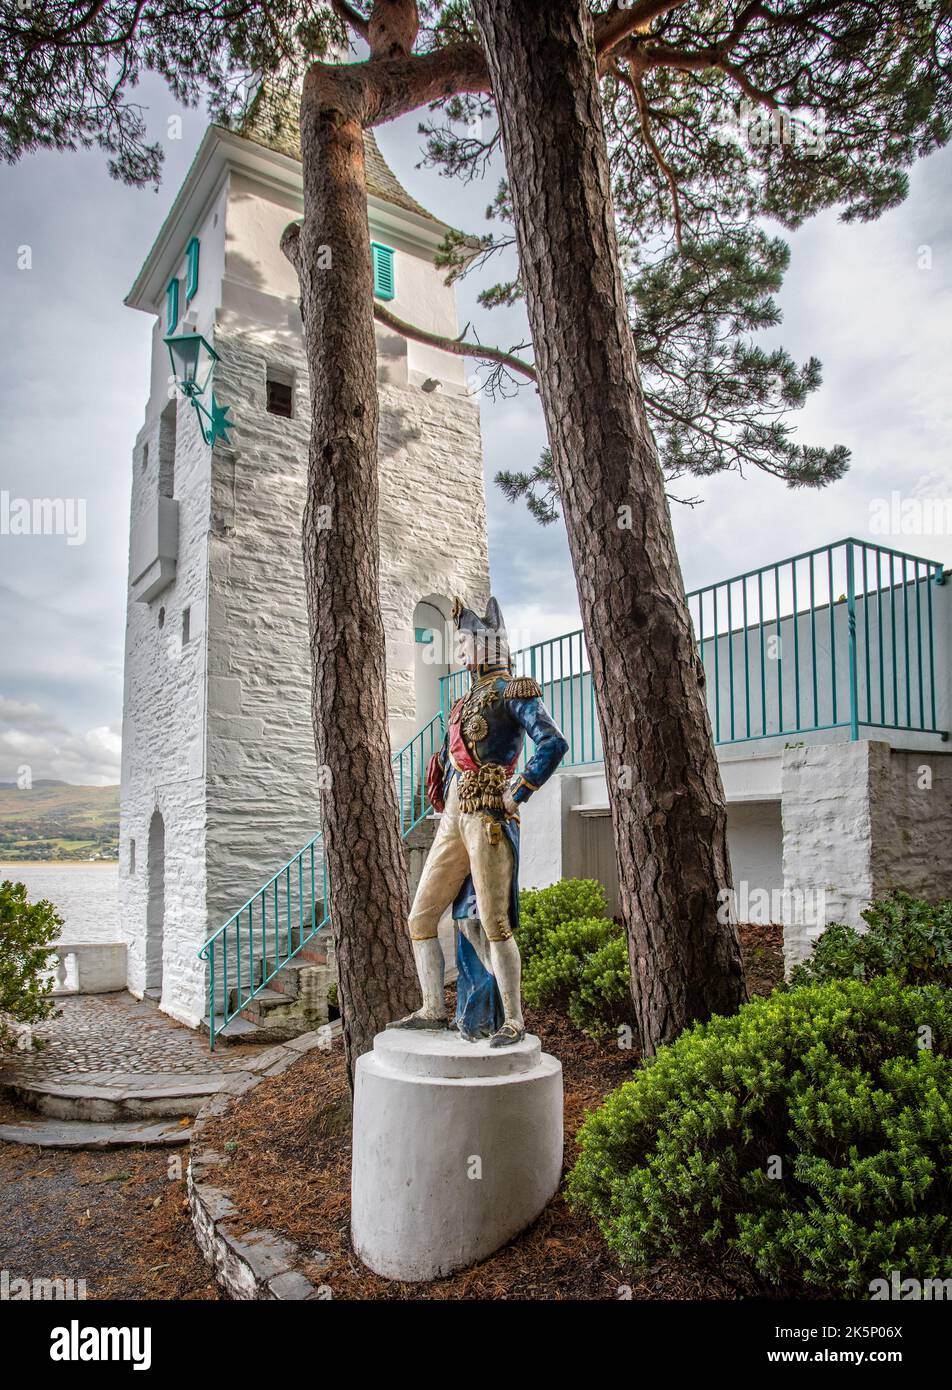 Statue of Lord Nelson in Portmeirion - Italianate style tourist village designed by Sir Clough Williams-Ellis, in Gwynedd, North Wales on 3 October 20 Stock Photo